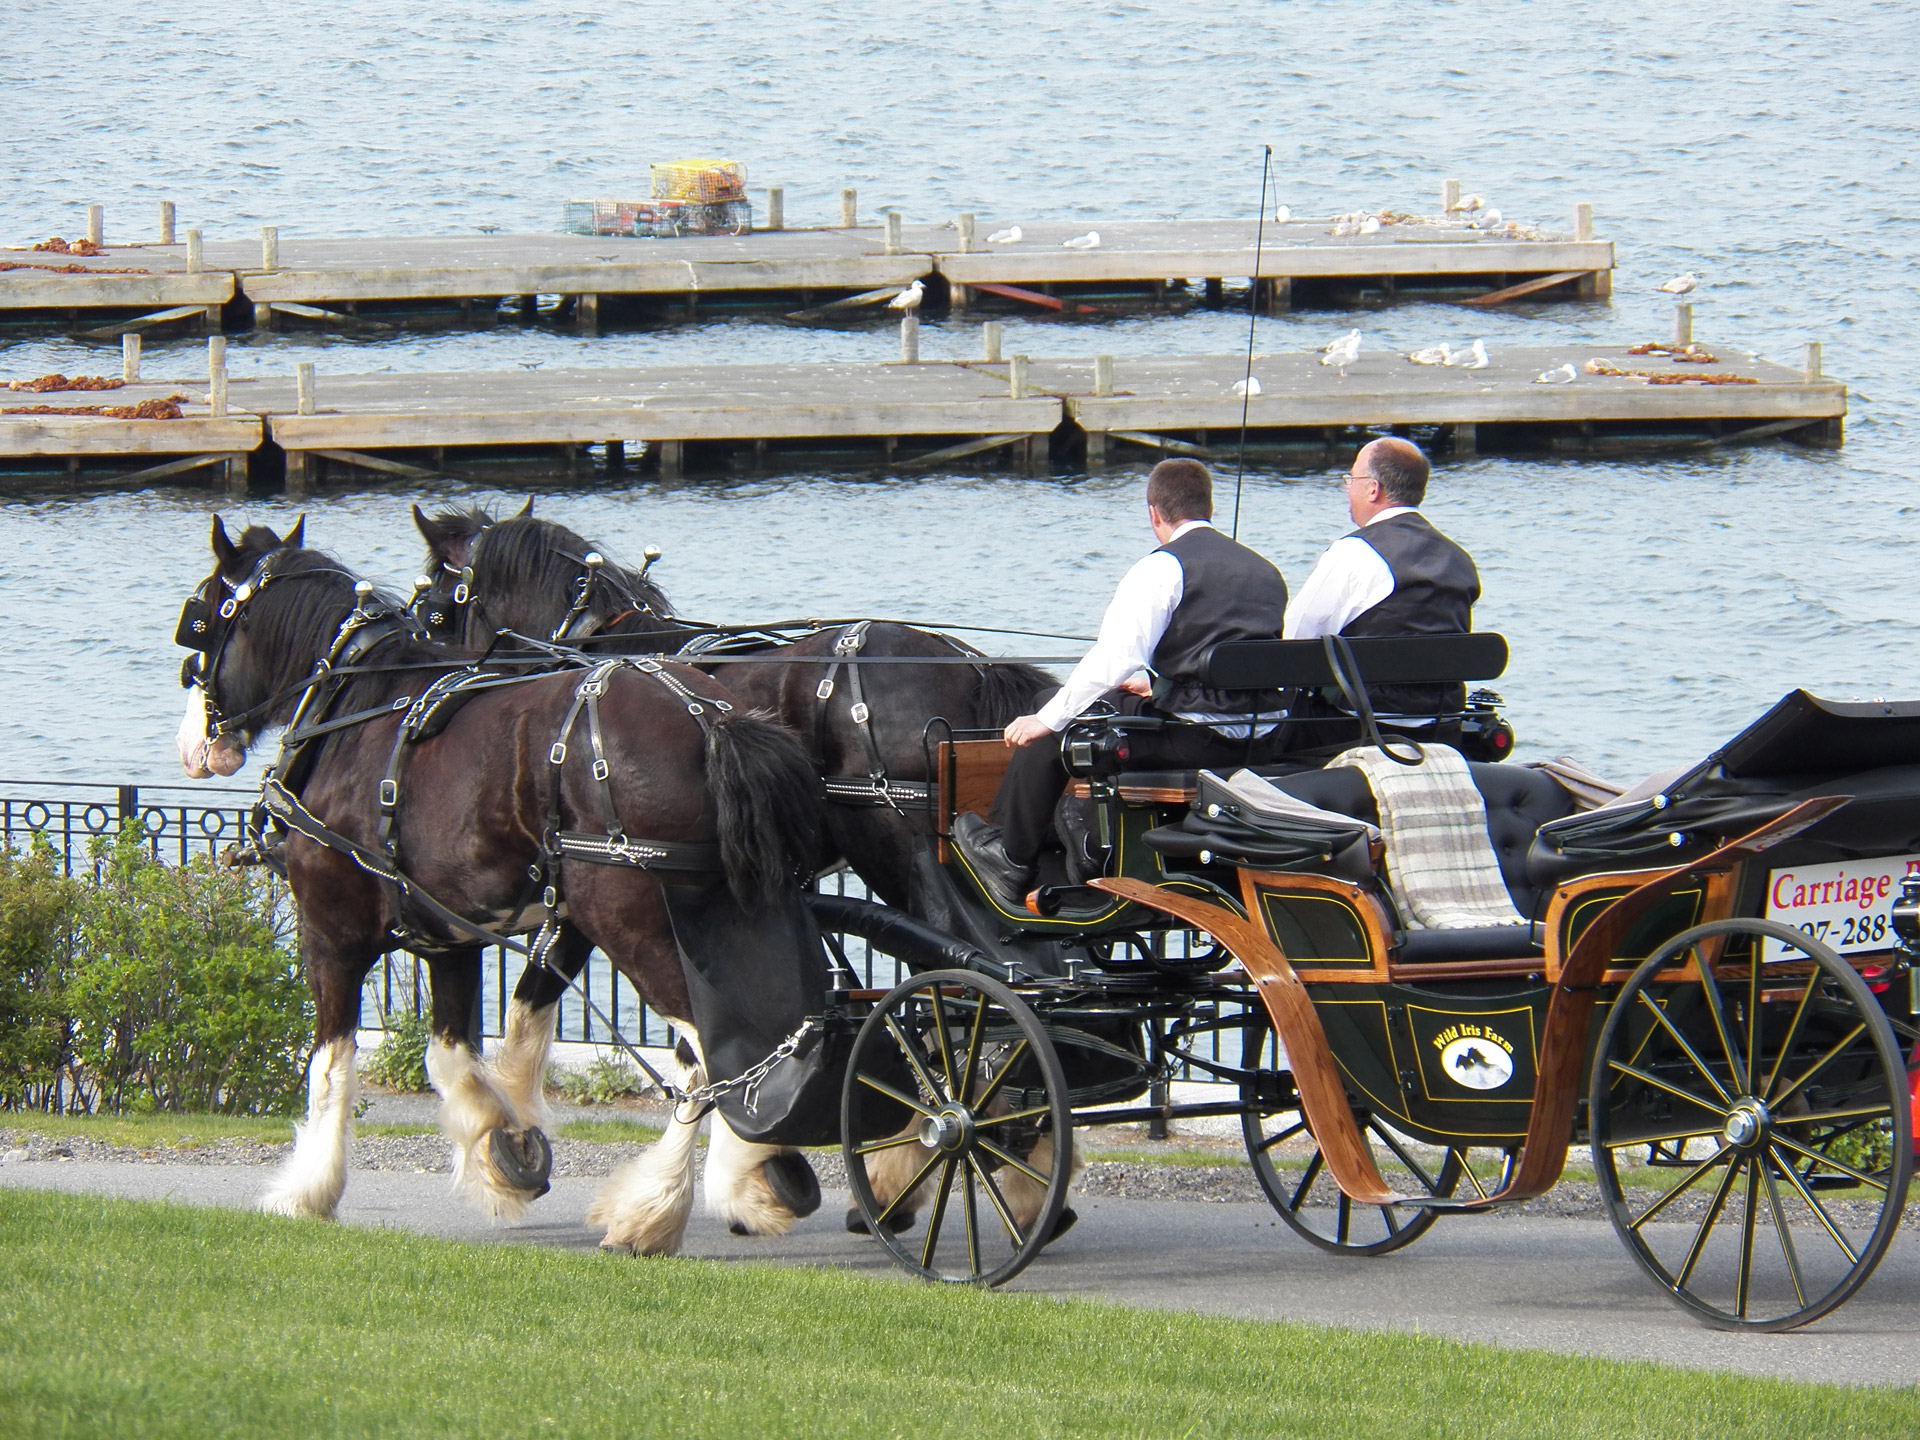 photo of a horse drawn carriage by the ocean